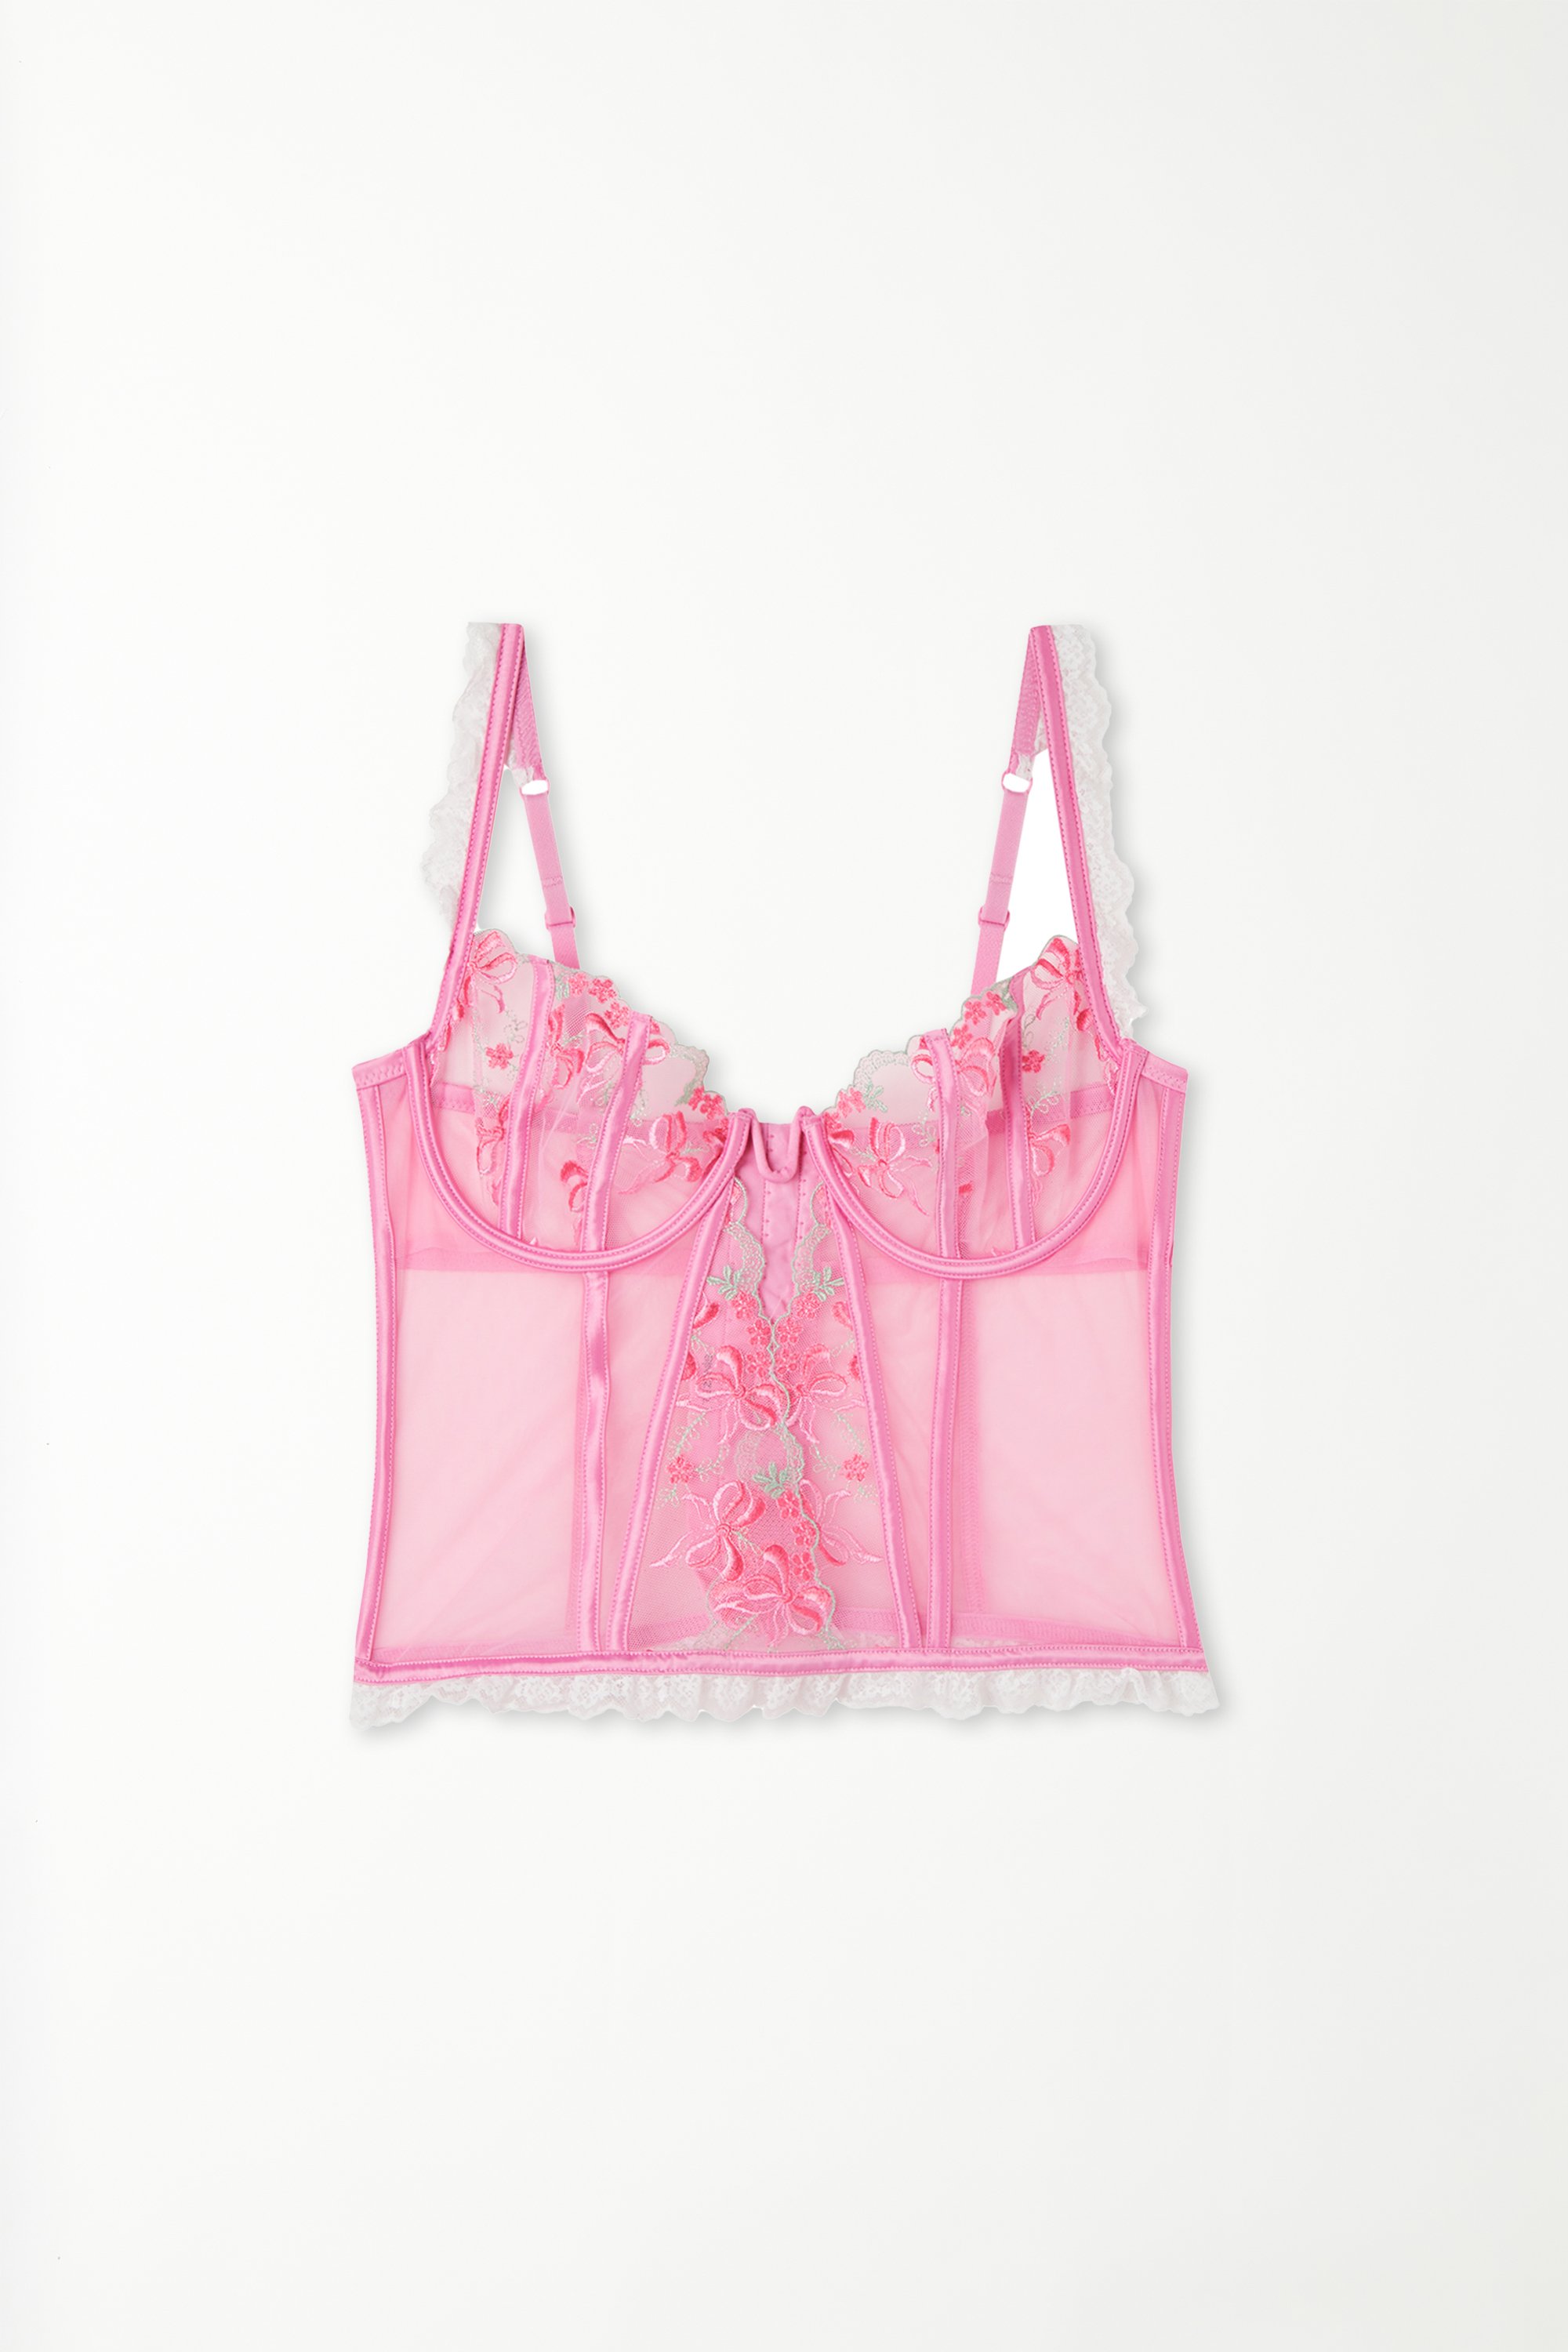 Pink Candy Lace Balconette Bra Top Corset